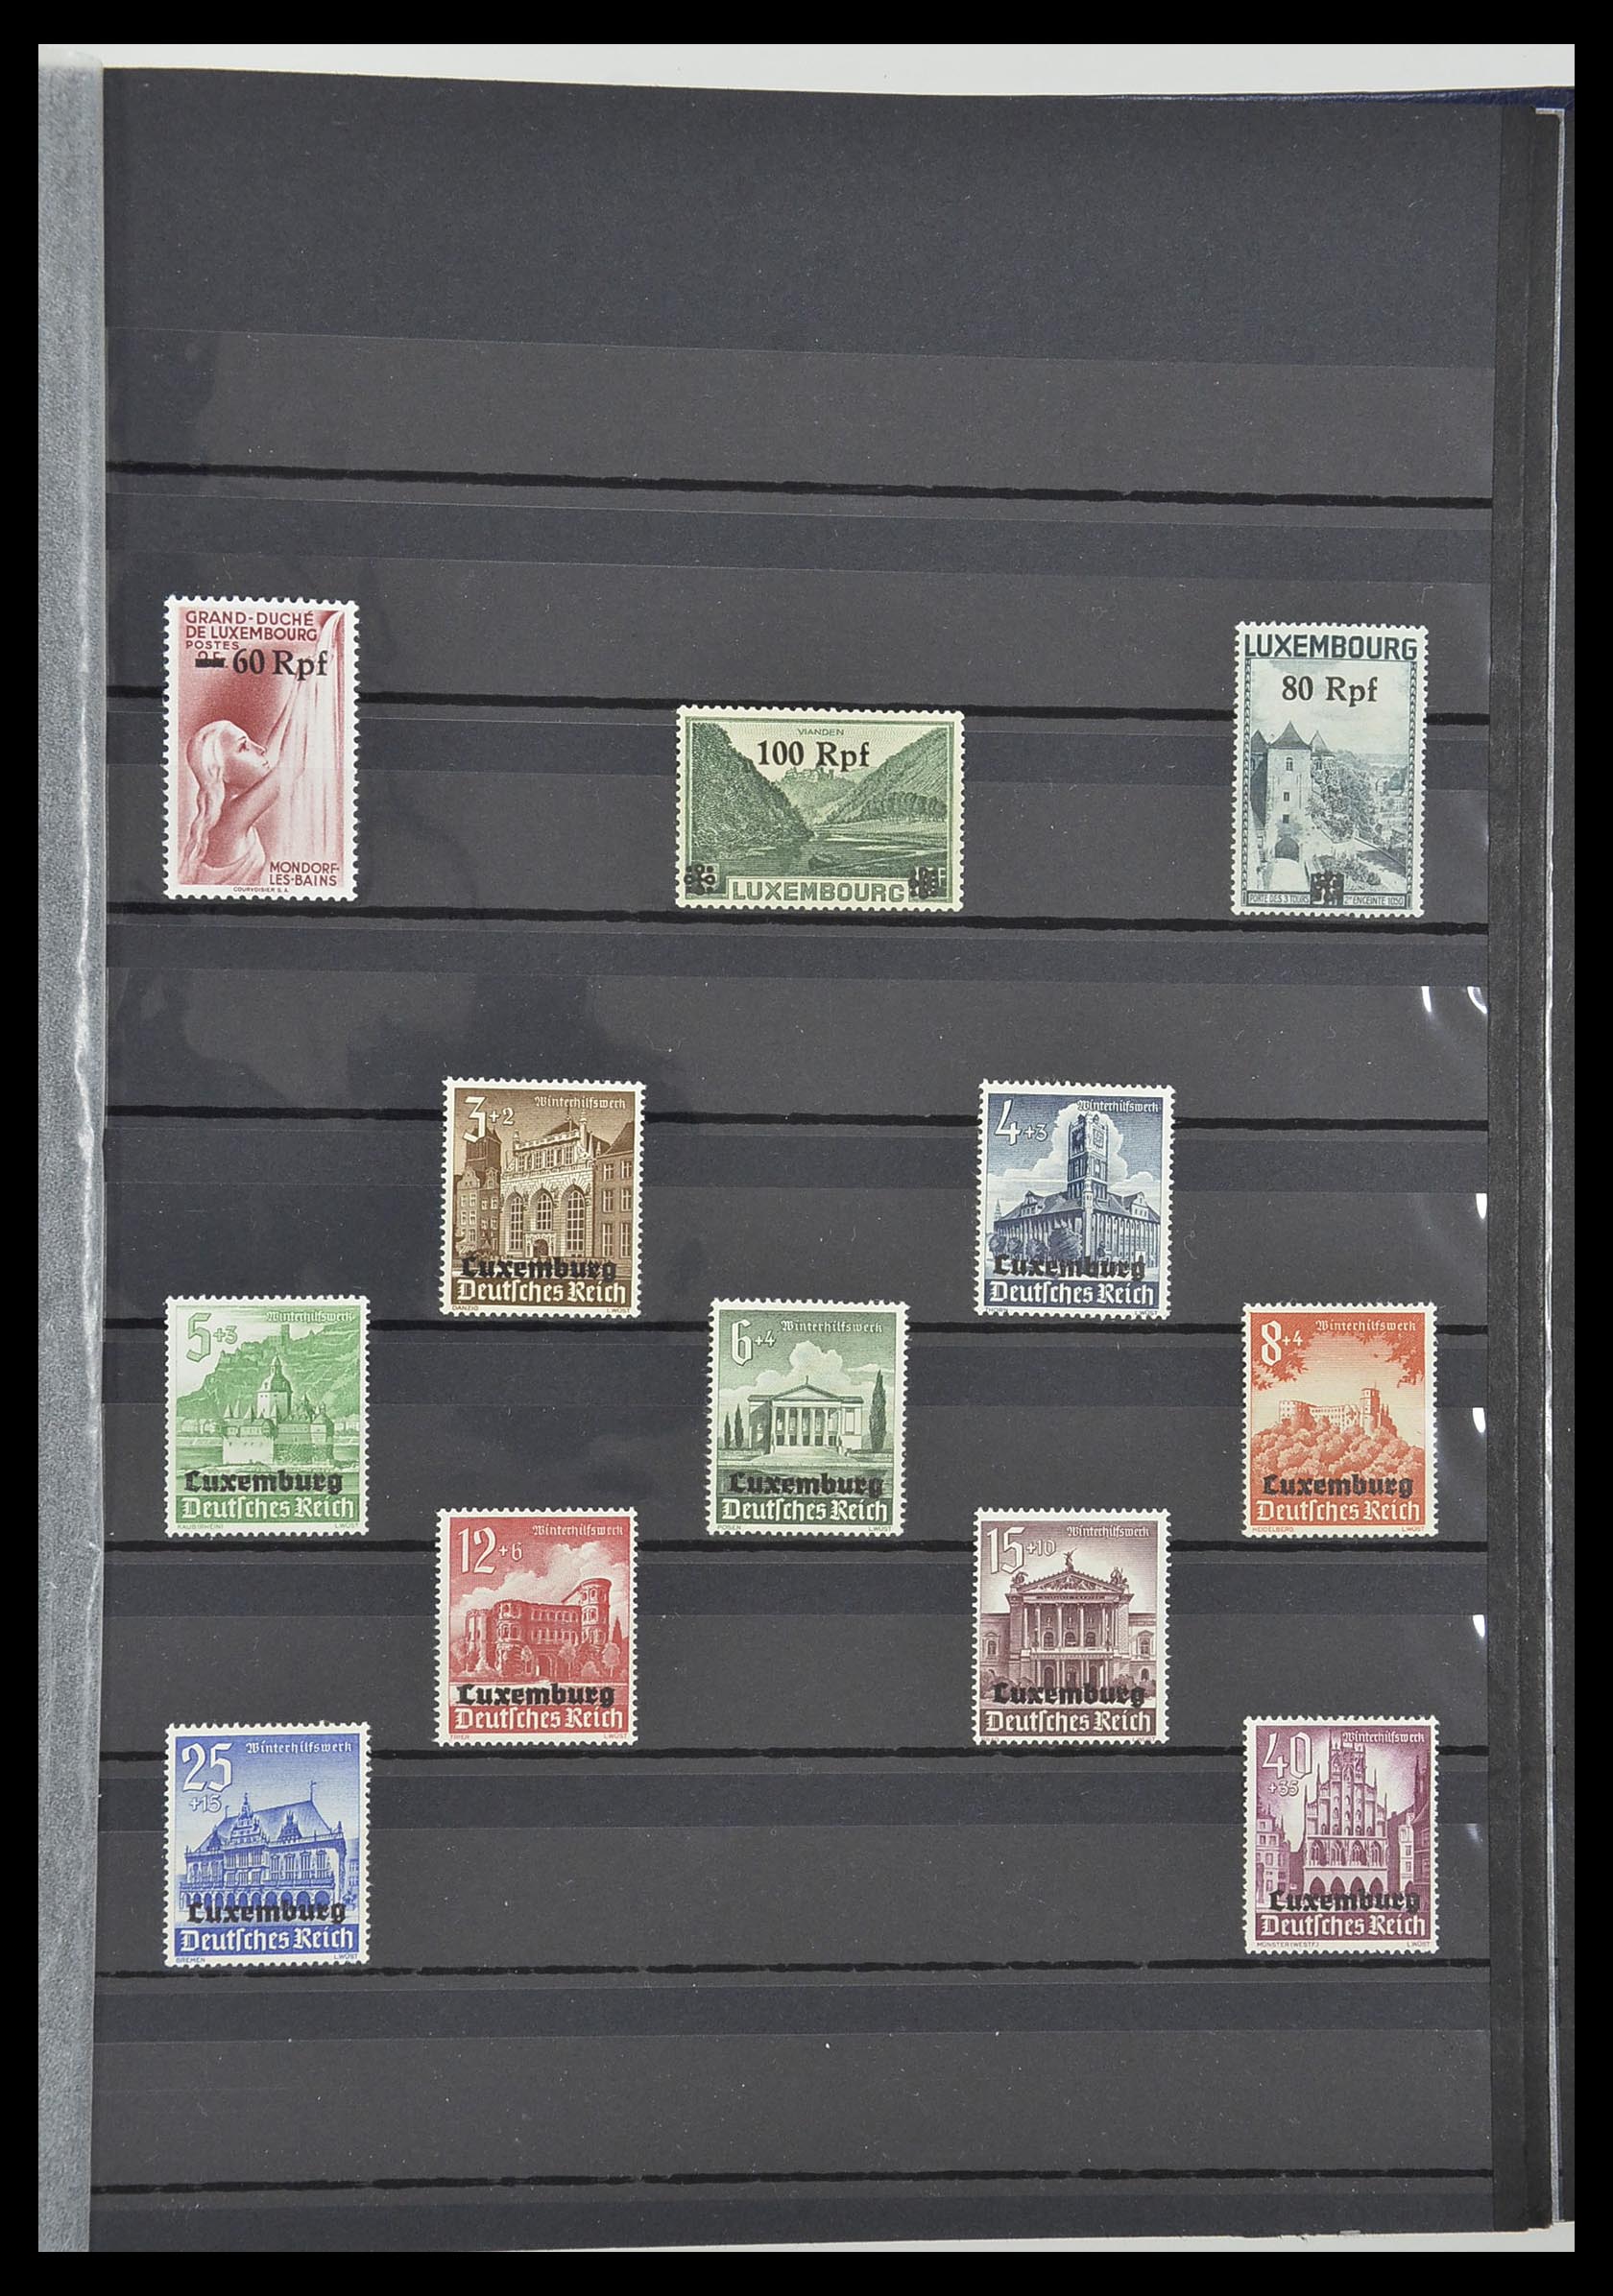 33553 028 - Stamp collection 33553 German territories and occupations 1939-1948.